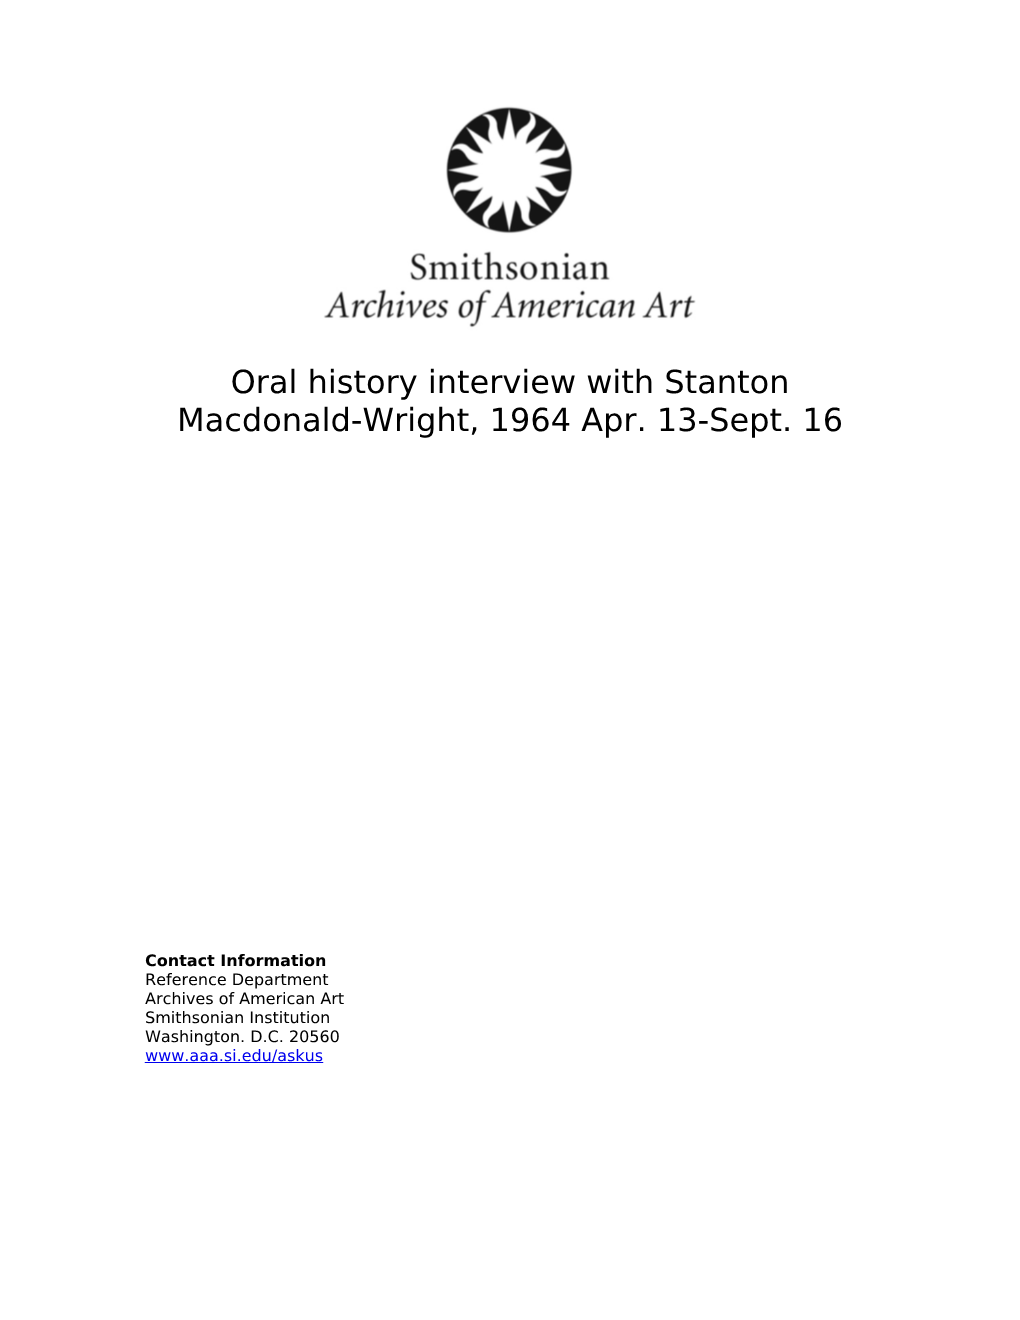 Oral History Interview with Stanton Macdonald-Wright, 1964 Apr. 13-Sept. 16